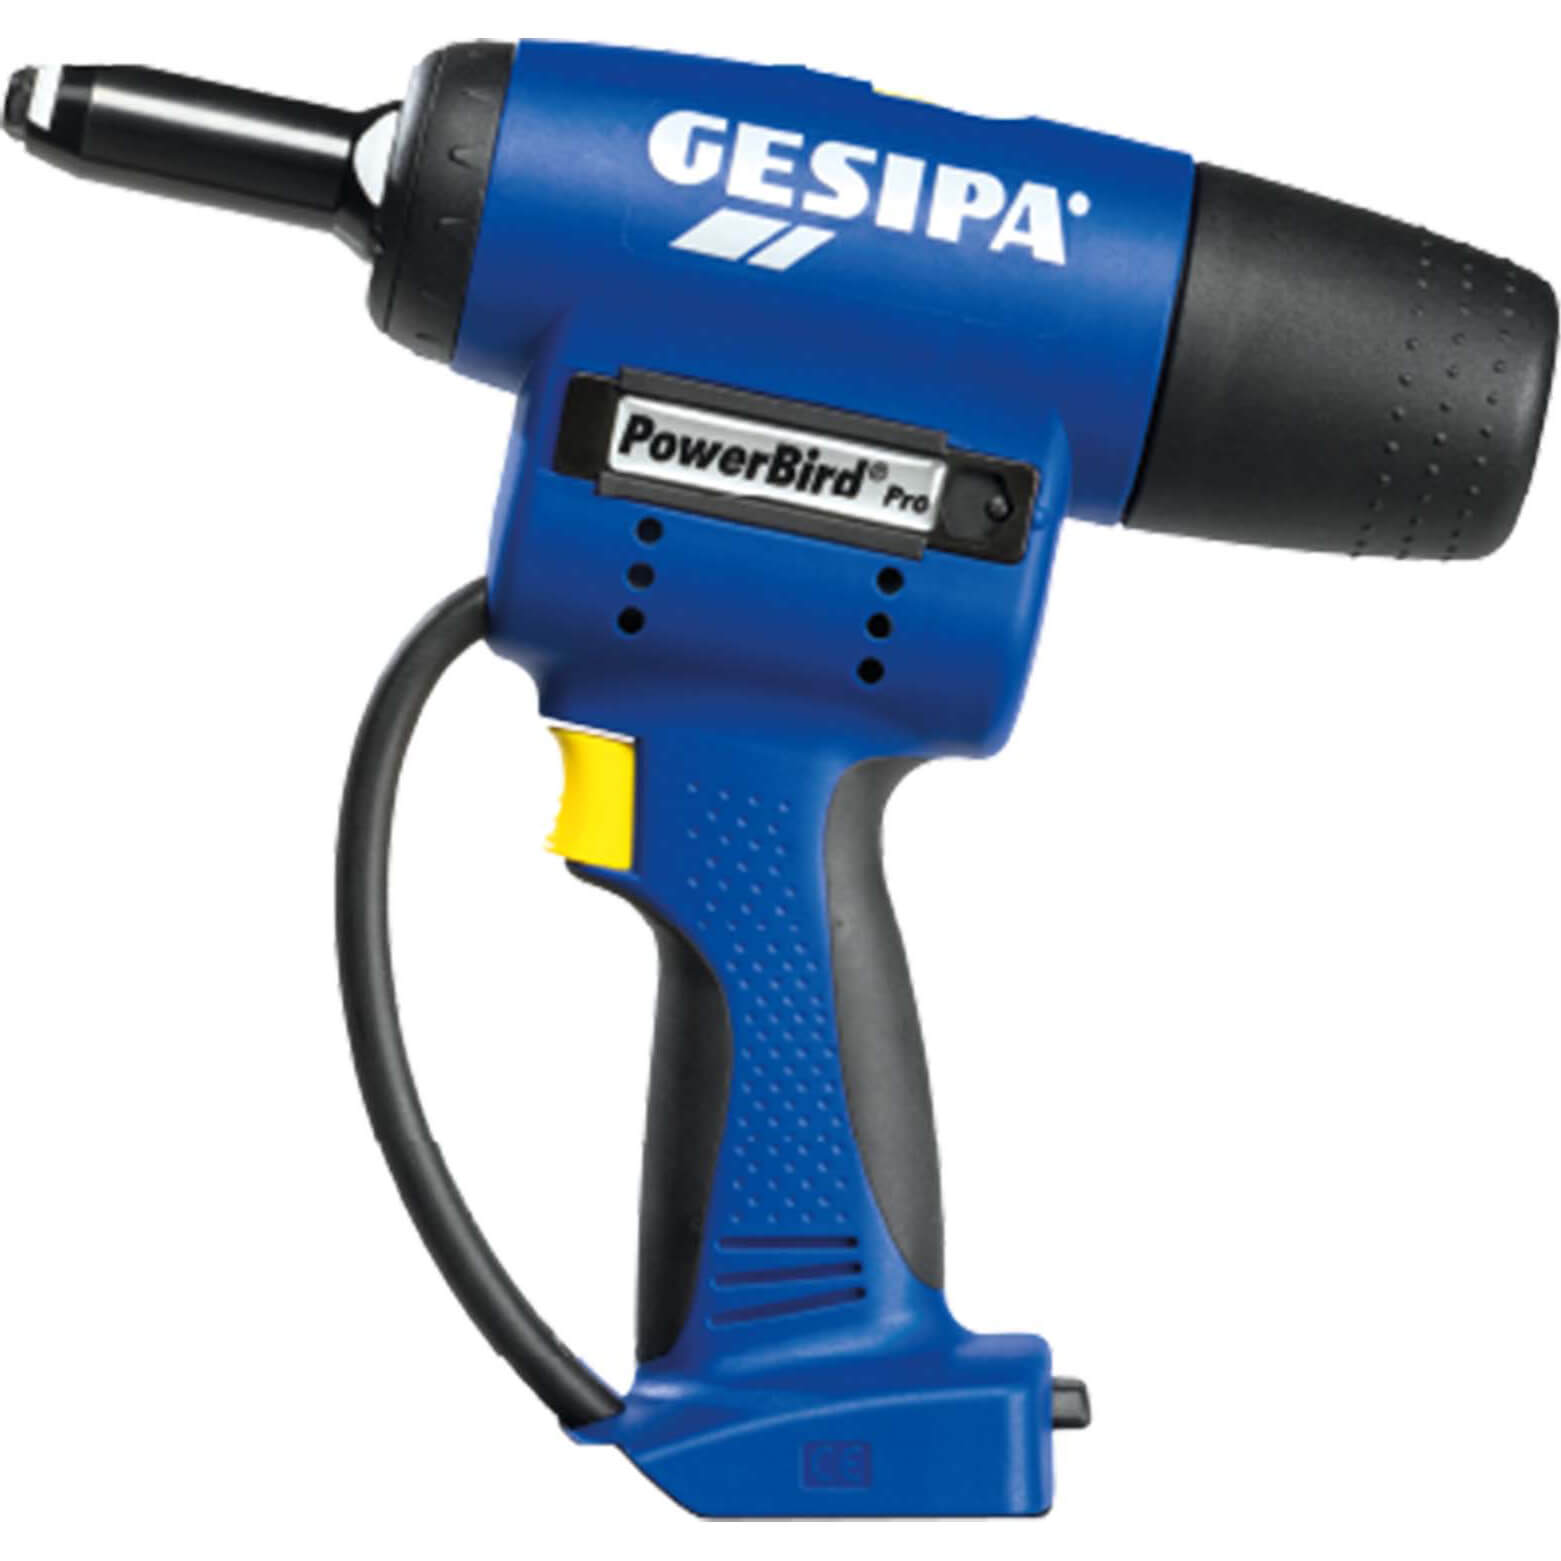 Image of Gesipa PowerBird Pro Gold Edition Cordless Riveter No Batteries No Charger No Case